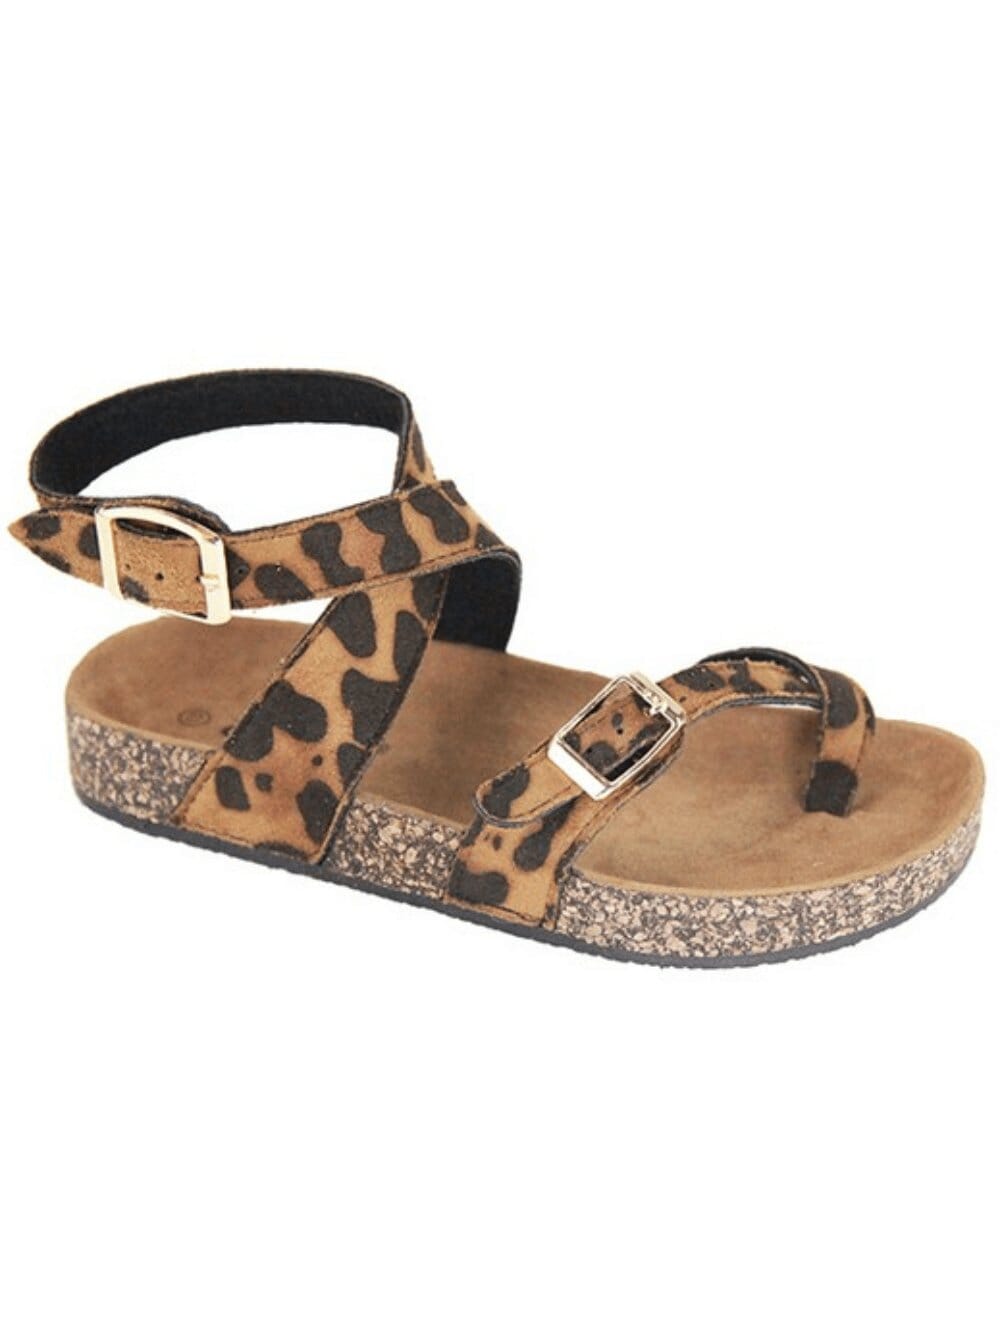 Girls' Boutique Sandals, Shoes, & Footwear Collection